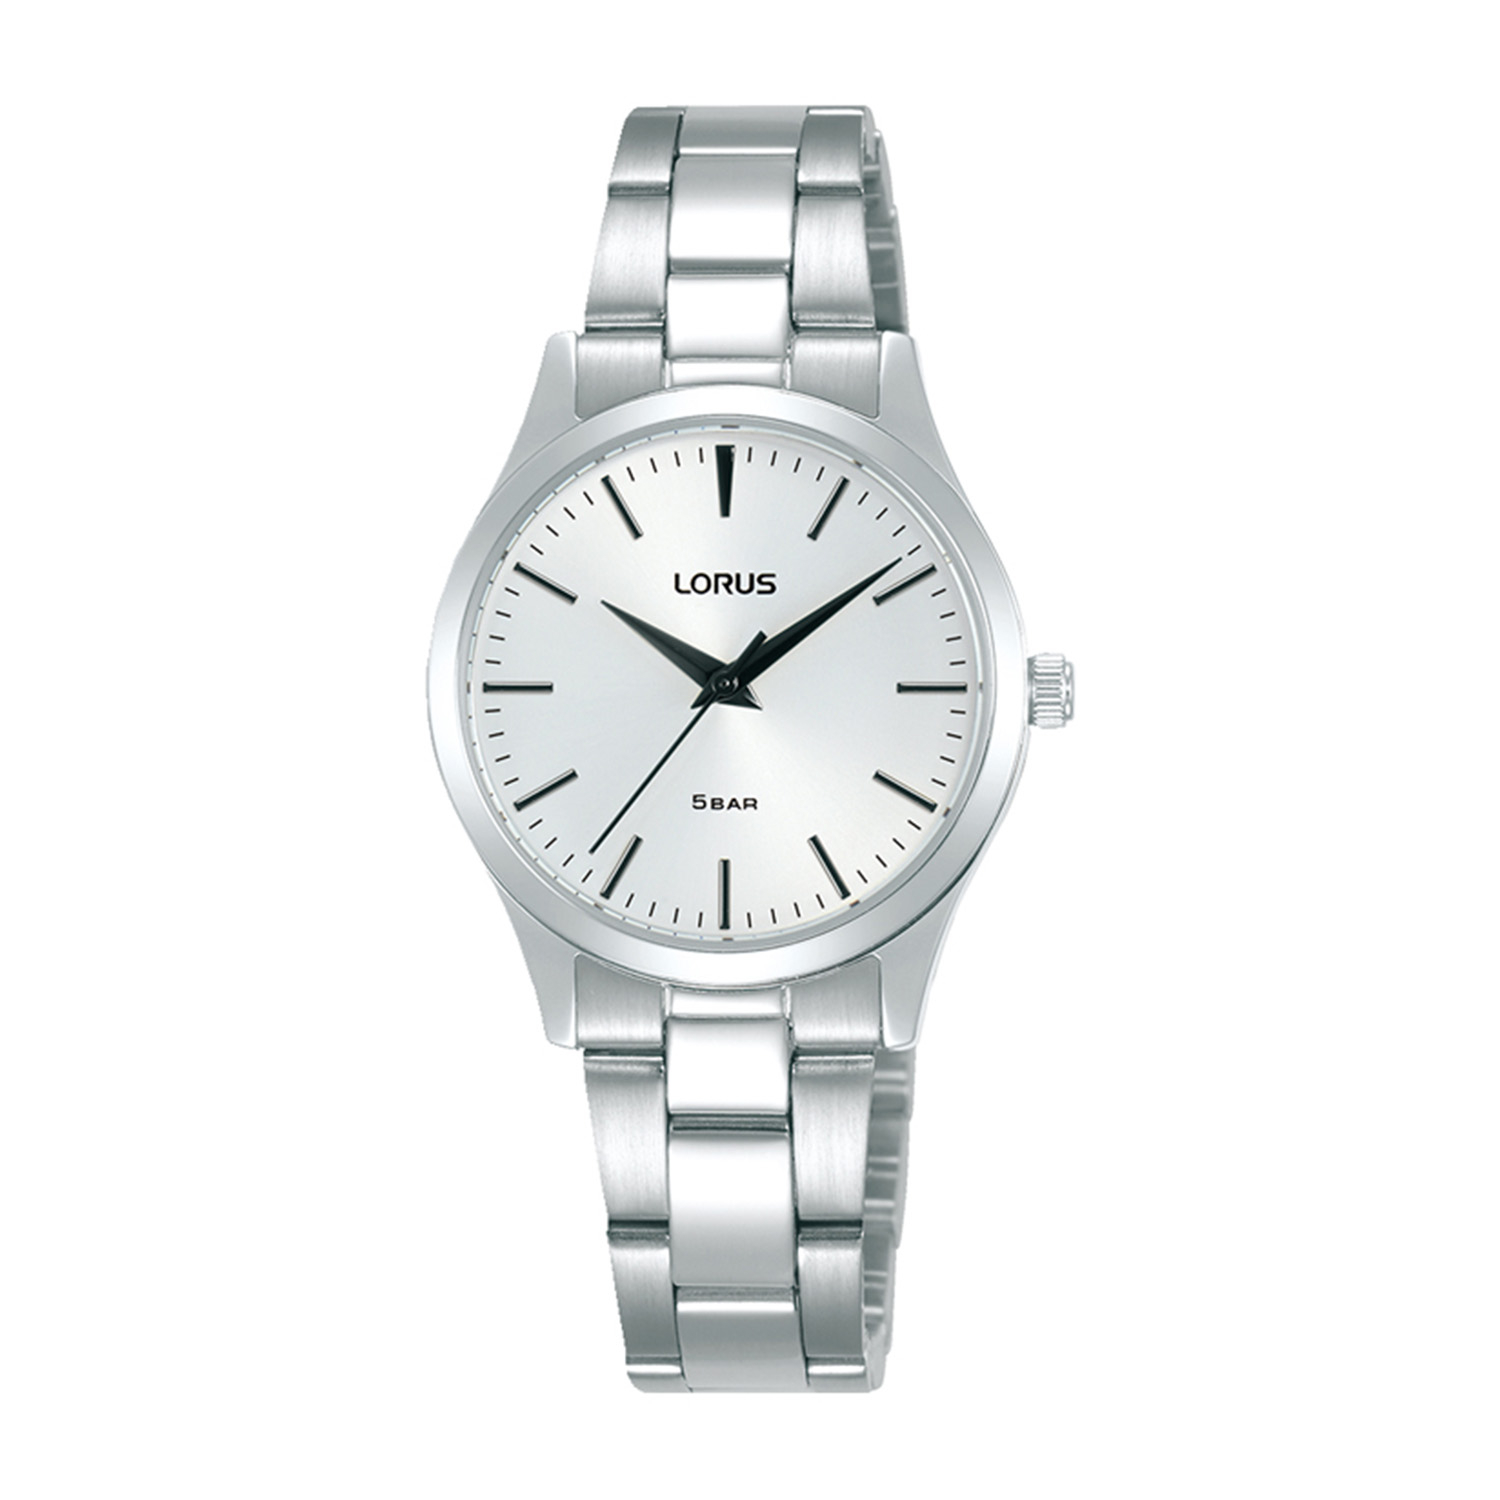 Womens watch LORUS made of silver stainless steel with white dial and bracelet.